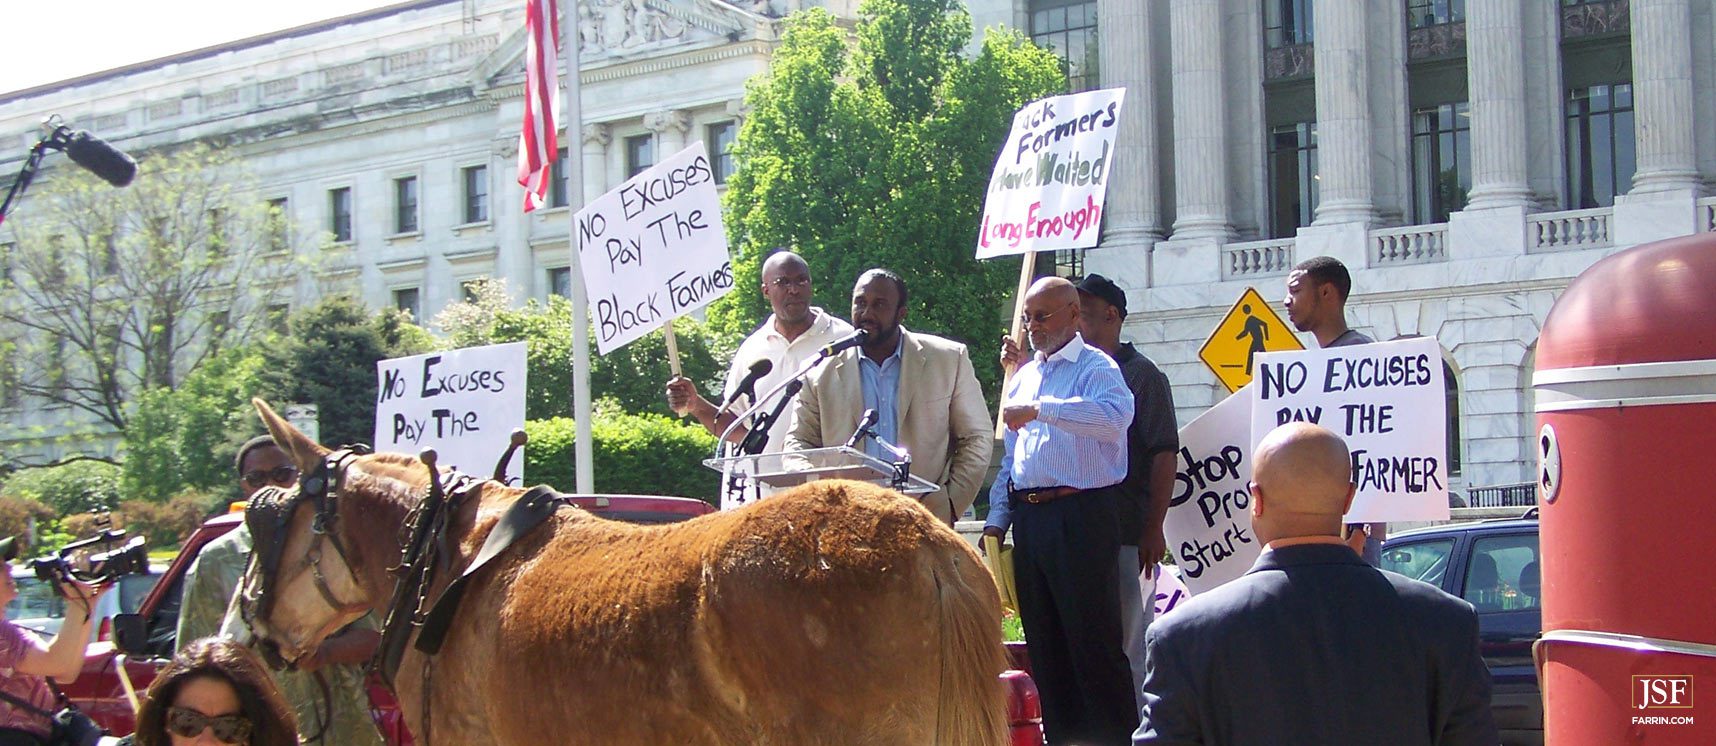 John Boyd, Jr., speaking in front of the Department of Agriculture in Washington, DC at a Black Farmers rally.